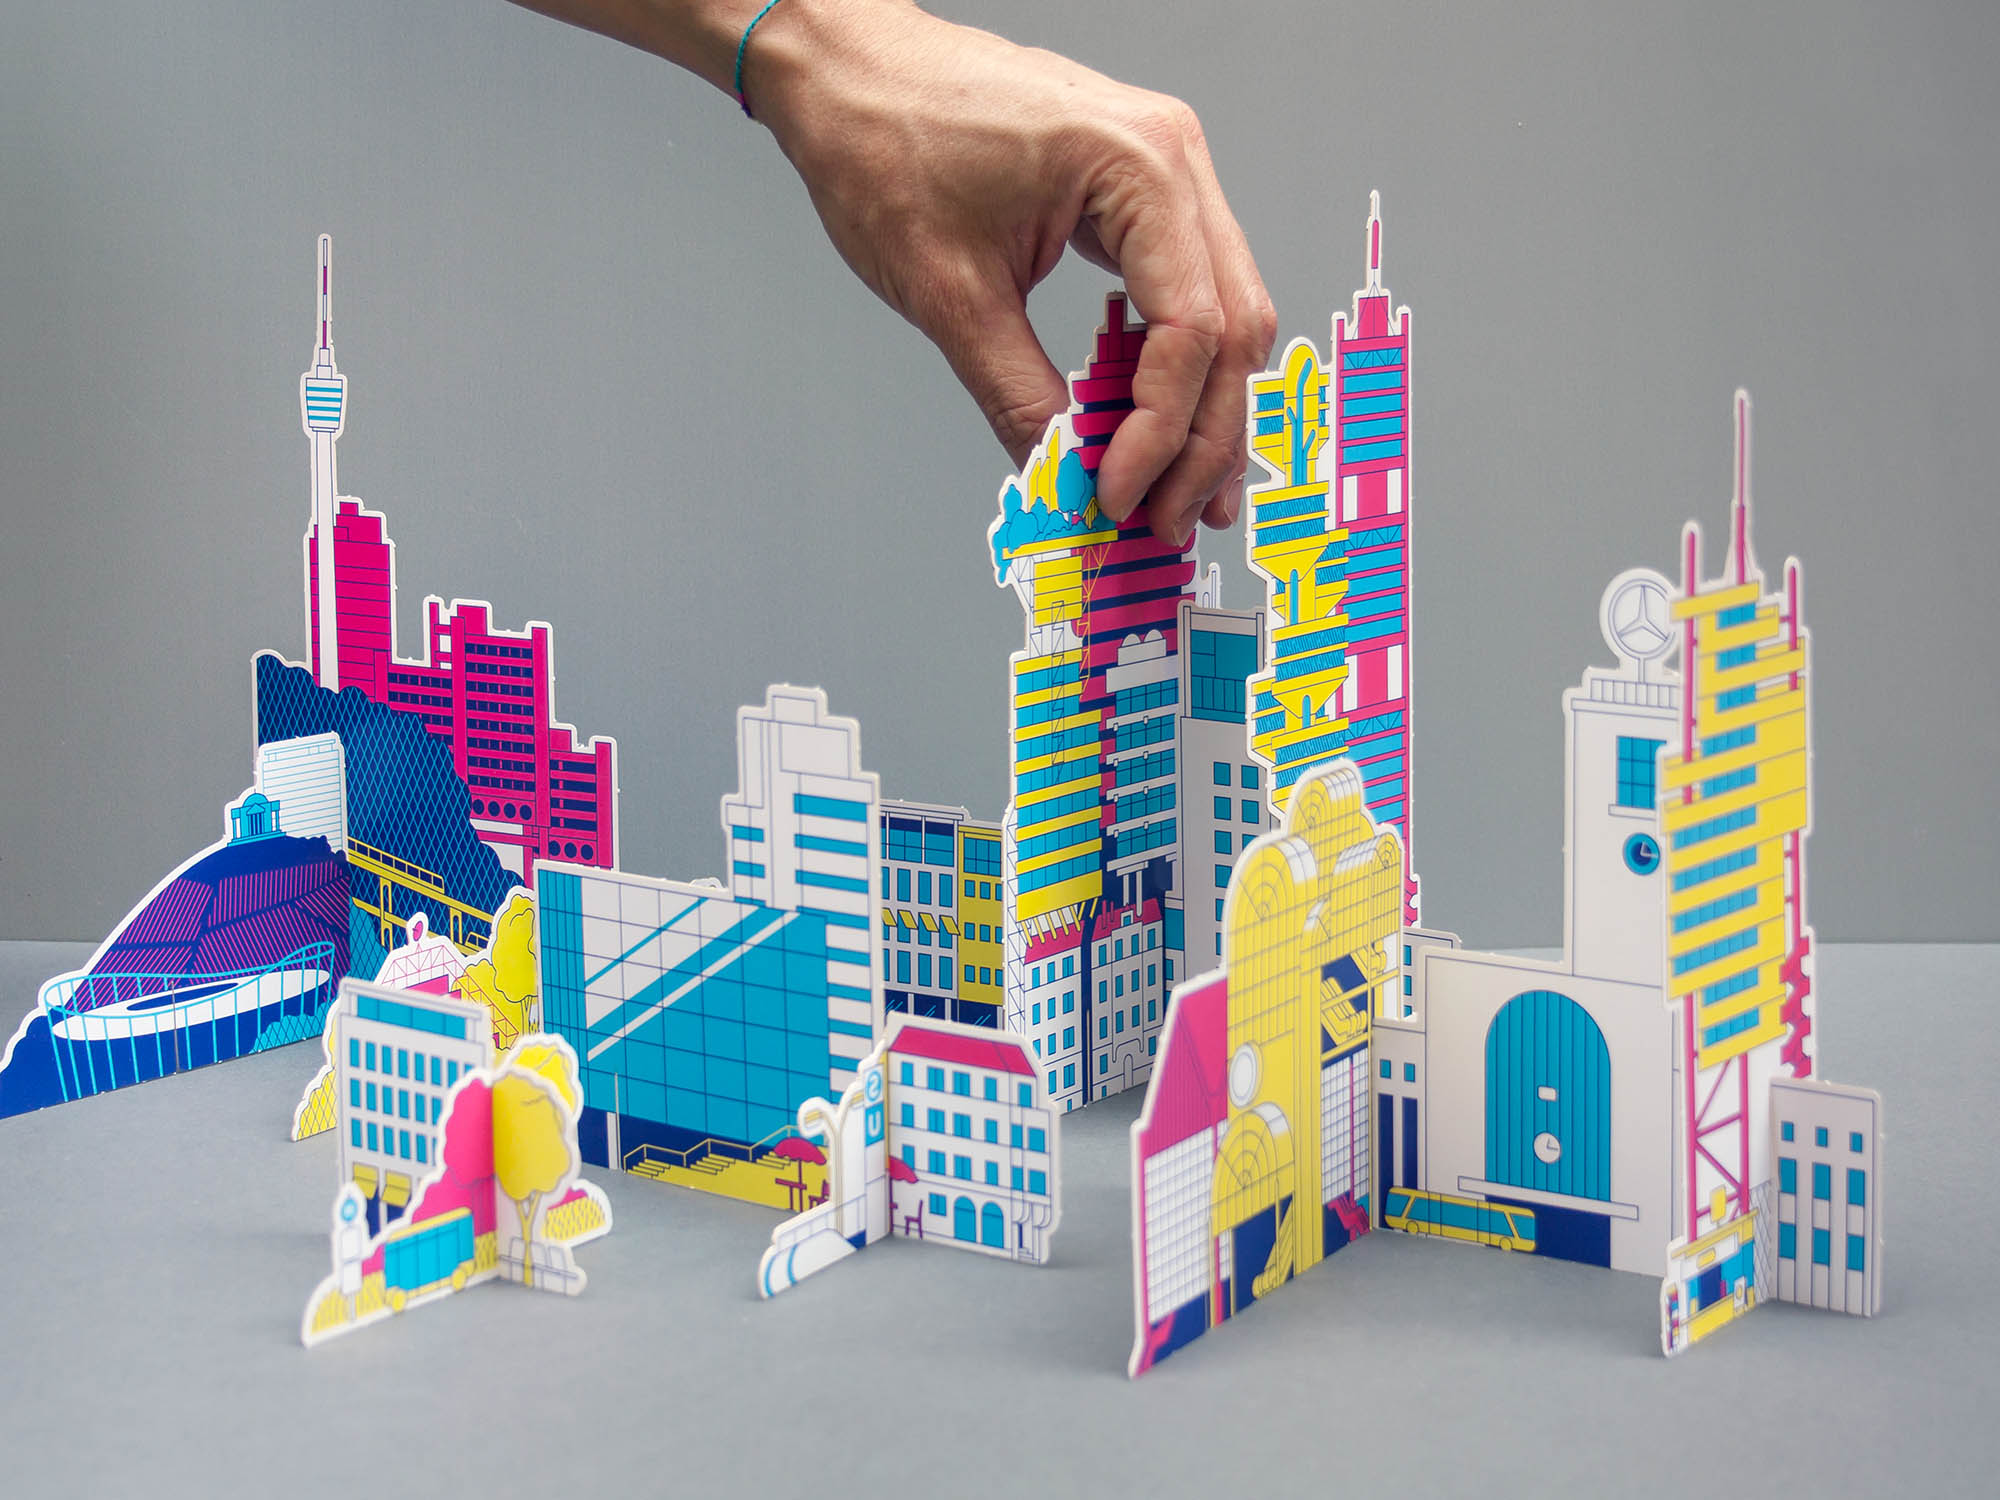 papercraft pop out architecture kit of brutalist and futuristic city. Designed by Axel Pfaender.